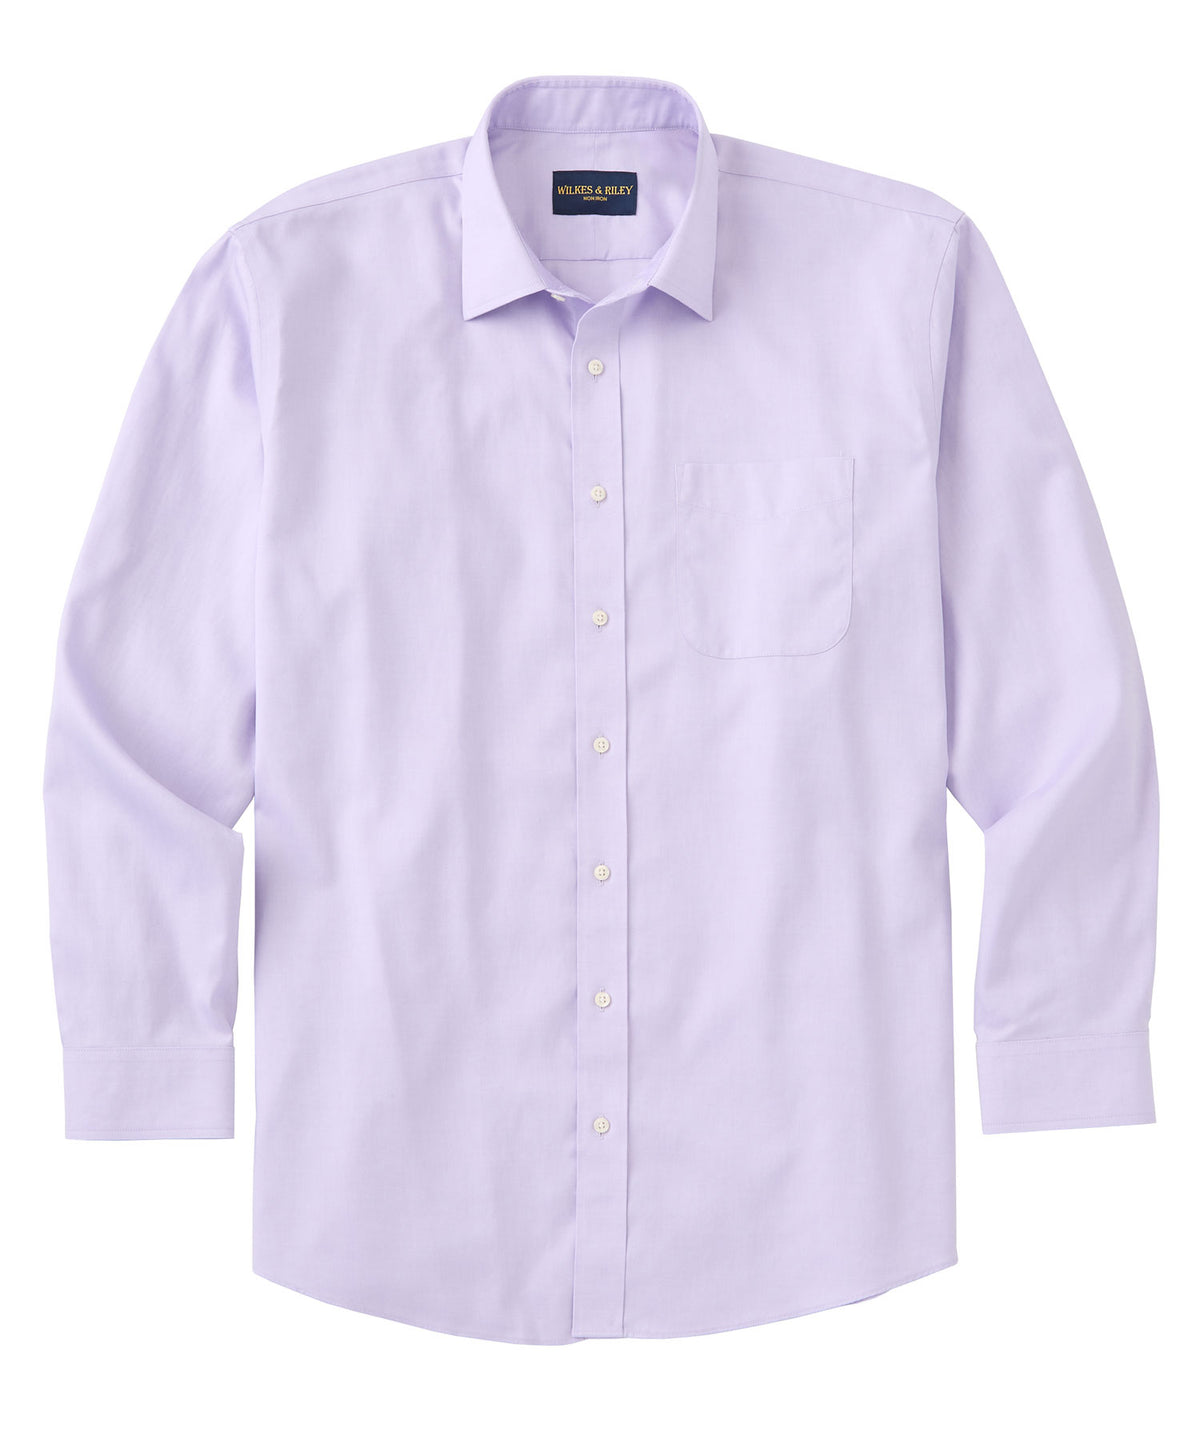 Wilkes &amp; Riley Tailored Fit Spread Collar Dress Shirt